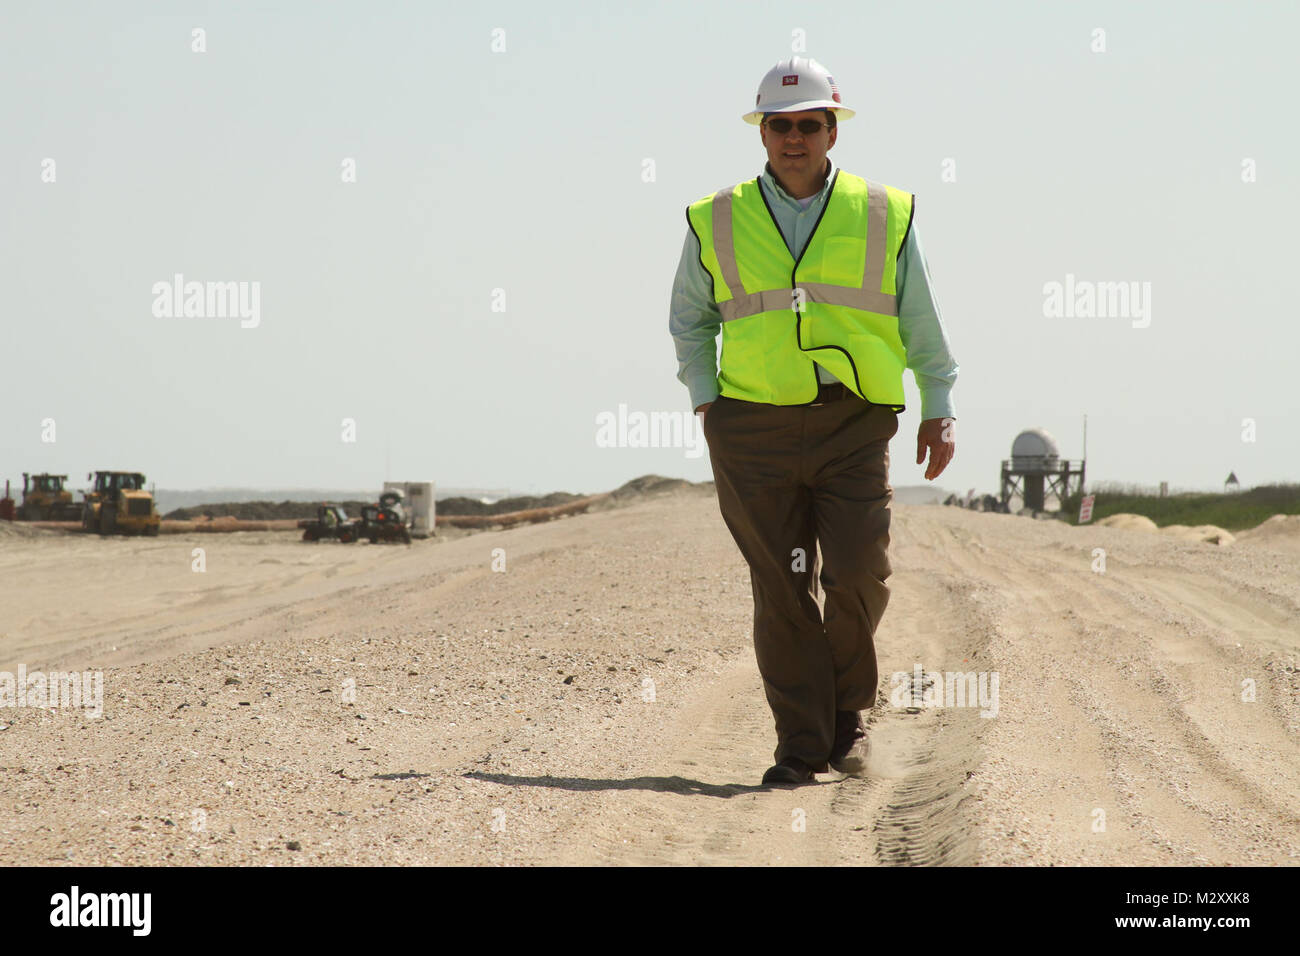 WALLOPS ISLAND, Va. – Mike Anderson, chief of the operations branch design section, walks along the newly built beach at the NASA Wallops Island Flight Facility here, May 7, 2012. The new beach will help protect more than $1 billion in federal government and Commonwealth of Virginia assets located here.  The Wallops Island facility is home to, not only NASA, but also the US Navy Surface Combat Systems Center and the Mid-Atlantic Regional Spaceport making this a growing economic generator for the Commonwealth of Virginia and the region. (U.S. Army photo/Patrick Bloodgood) 120507-A-OI229-036 by  Stock Photo